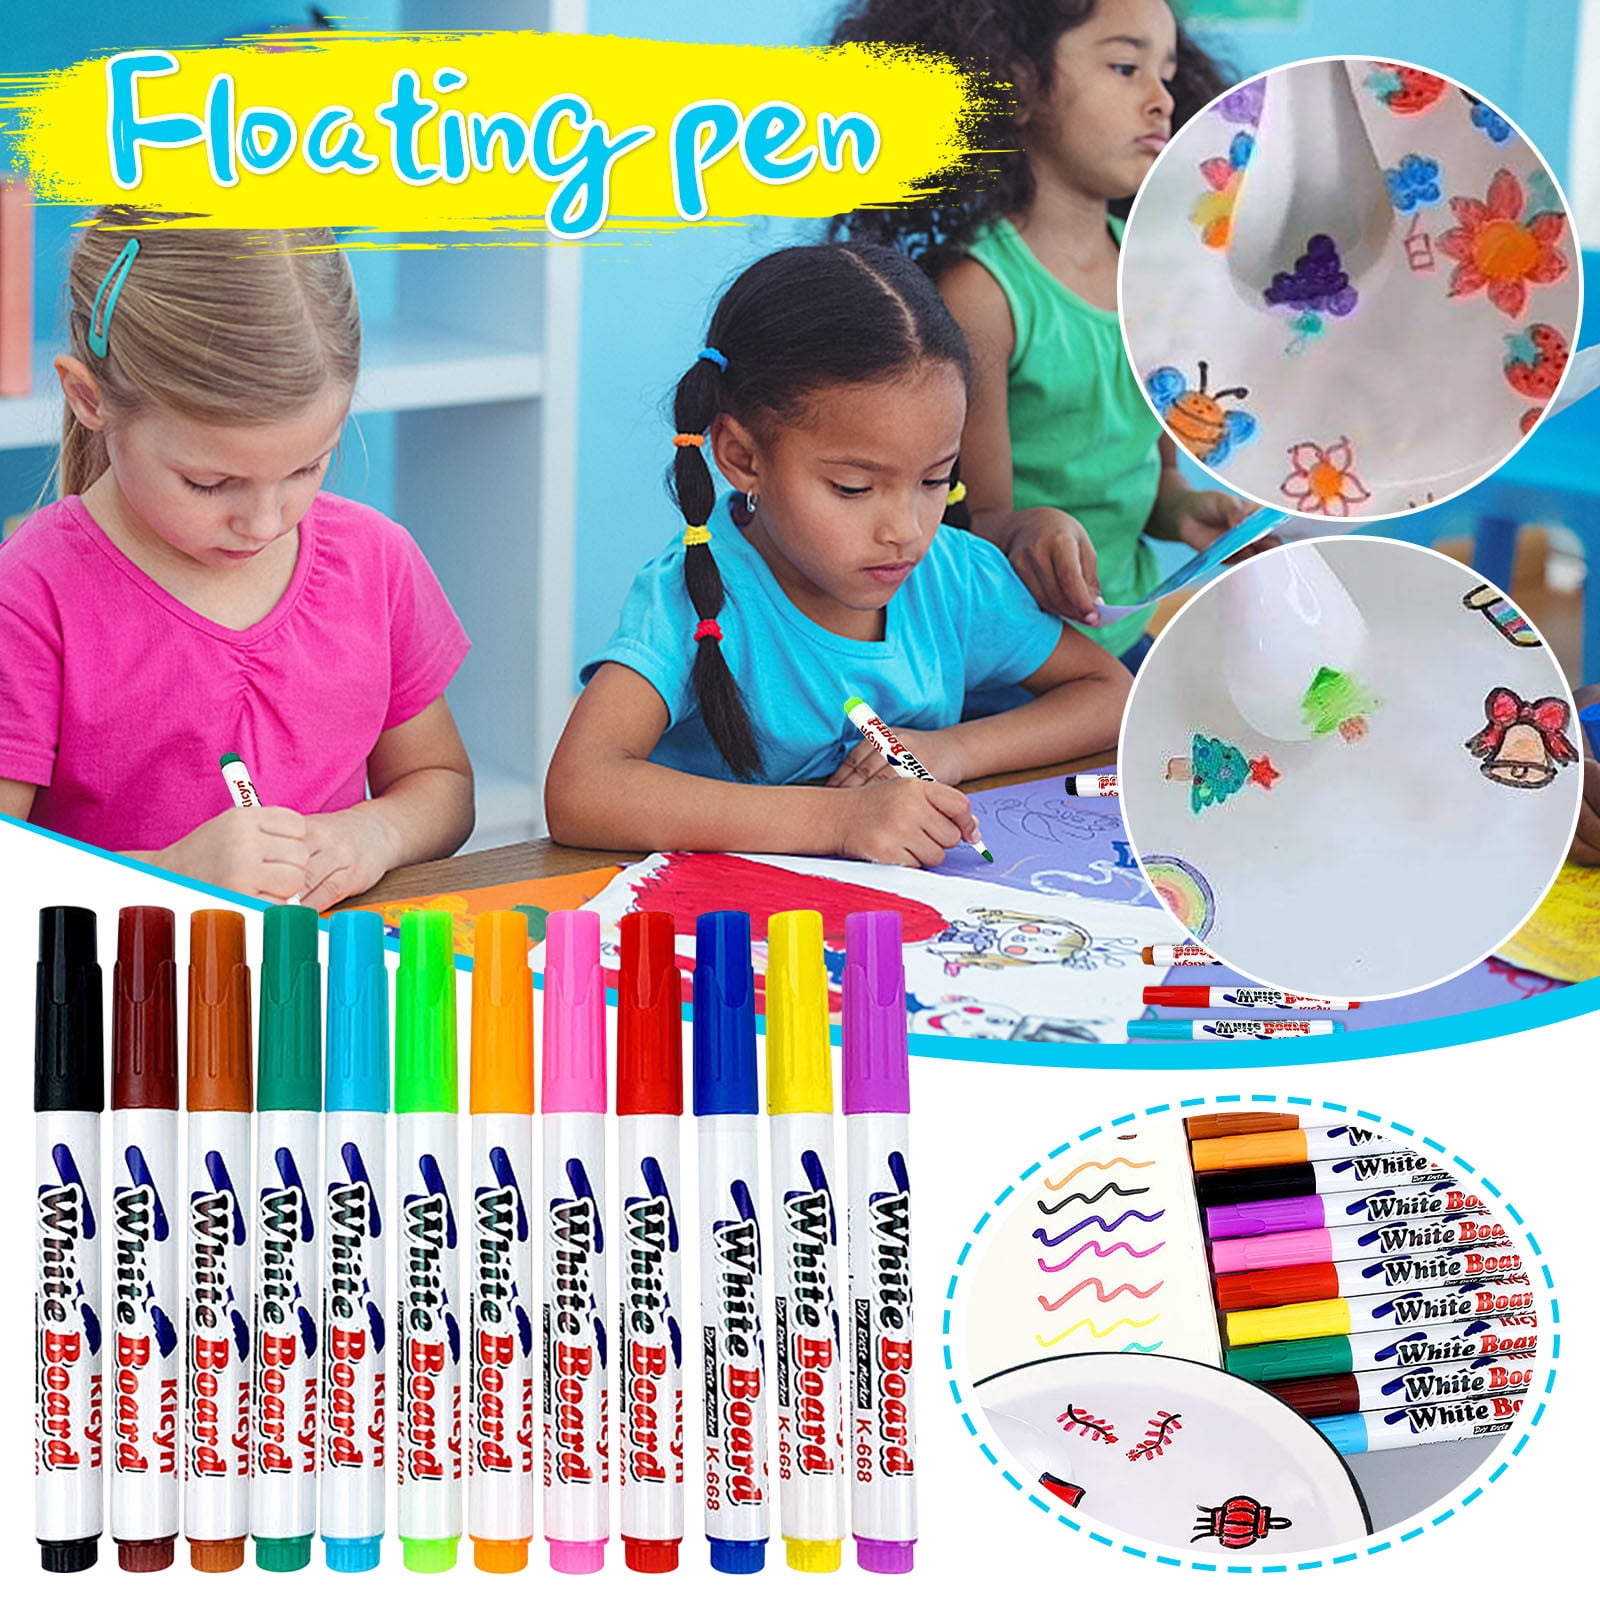  Tofficu 12pcs Whiteboard Pen Student Highlighters Mirror  Markers Erasable Glass Painting Pens Dry Wipe Pens Whiteboard Marker Pens  Wet Erase Pens Kids Suit Abs Child Magnetic Drawing Pen : Office